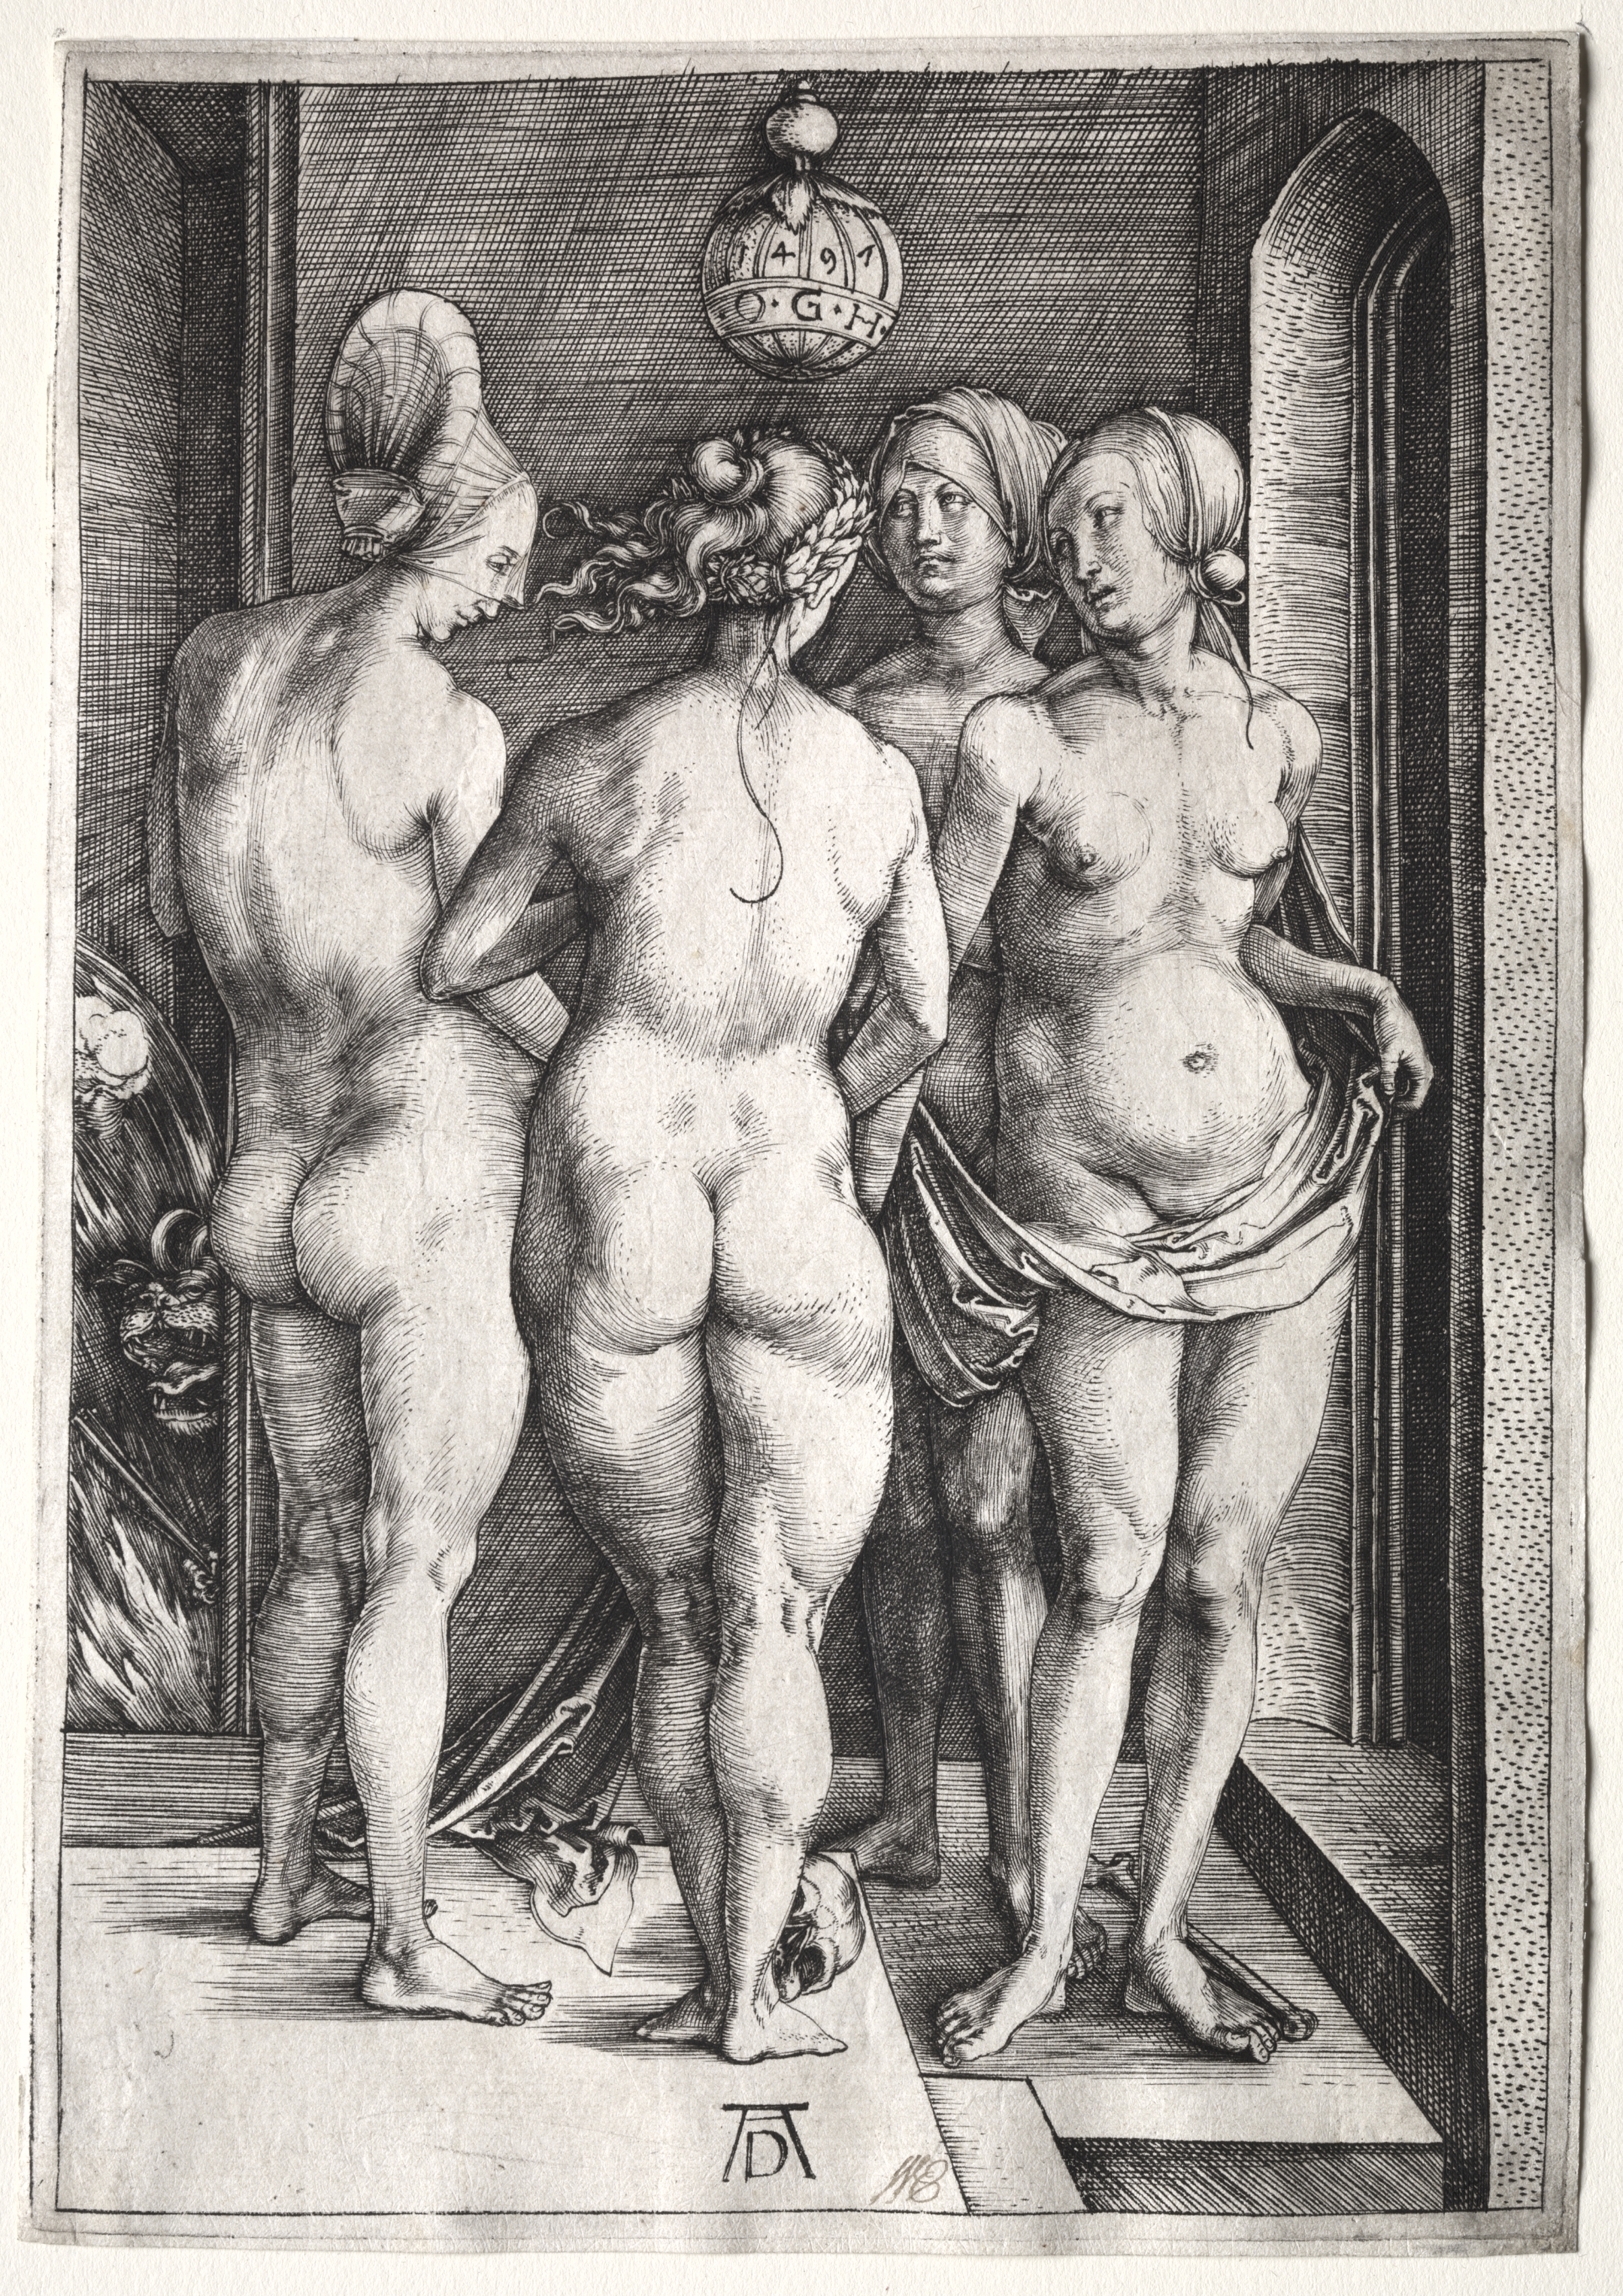 The Four Witches (Four Naked Women)